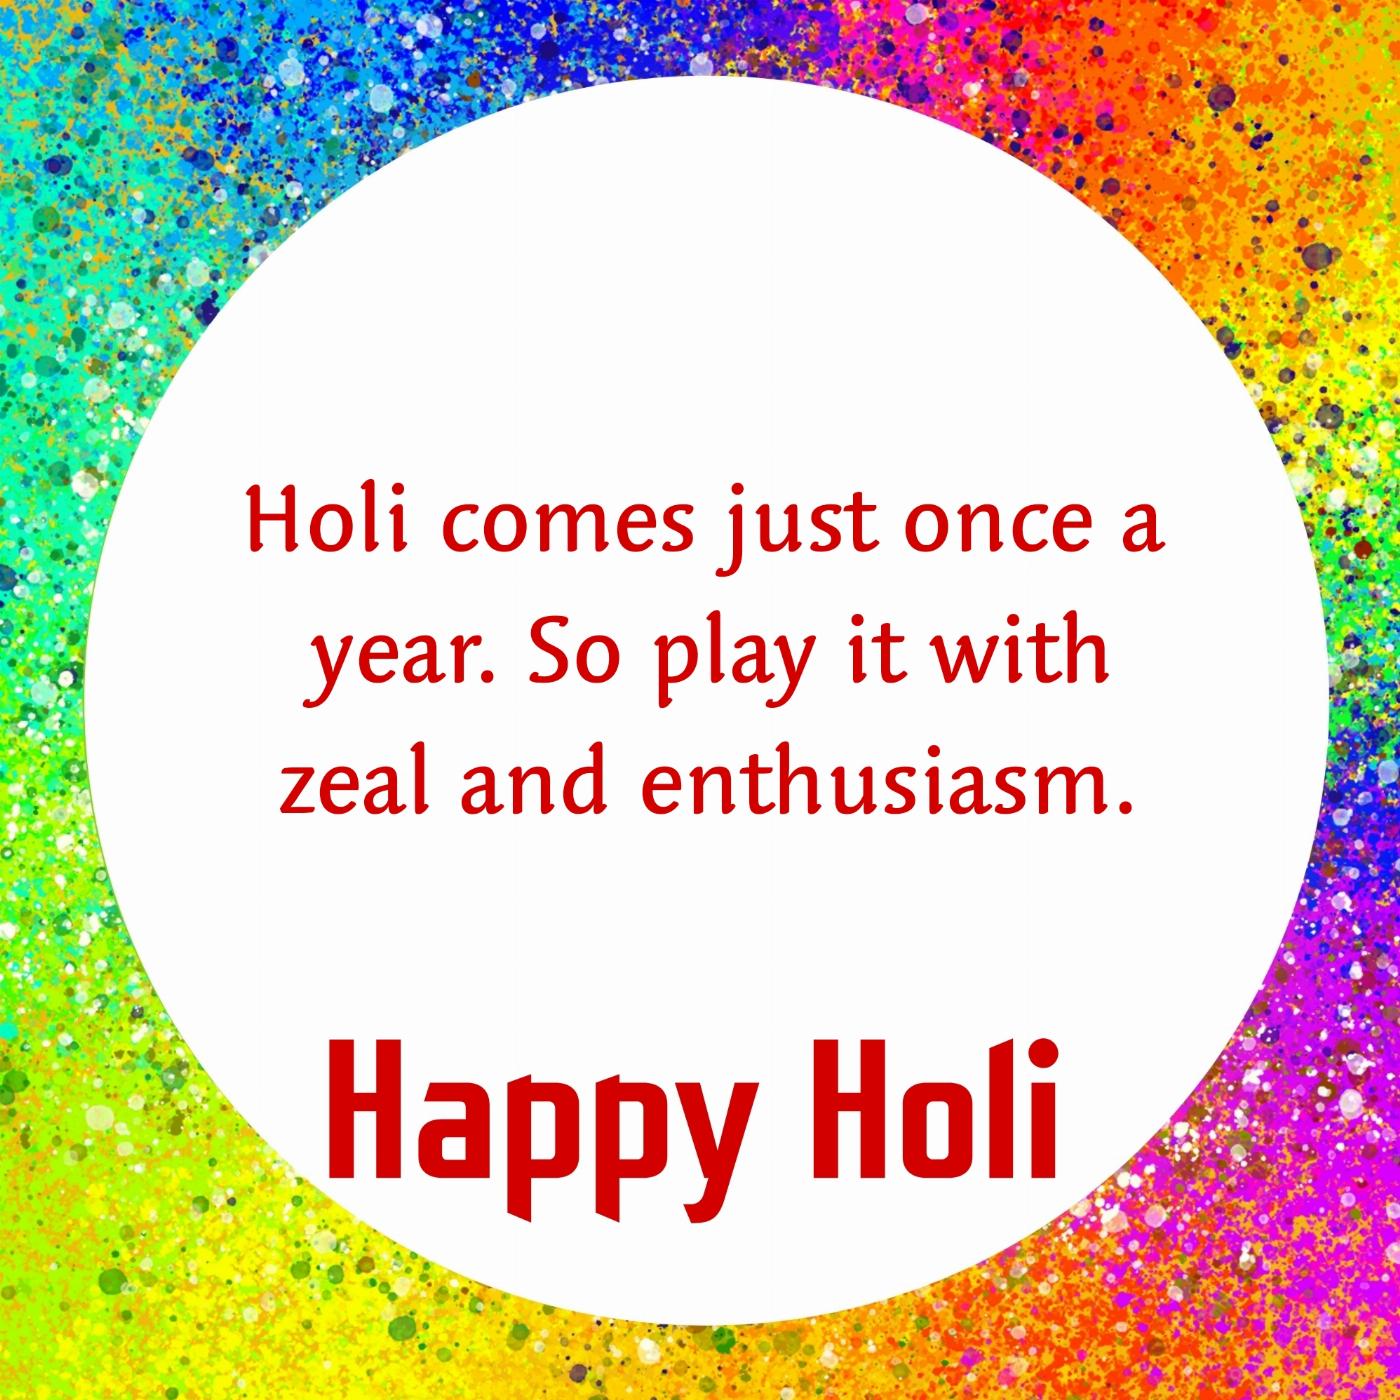 Holi comes just once a year So play it with zeal and enthusiasm